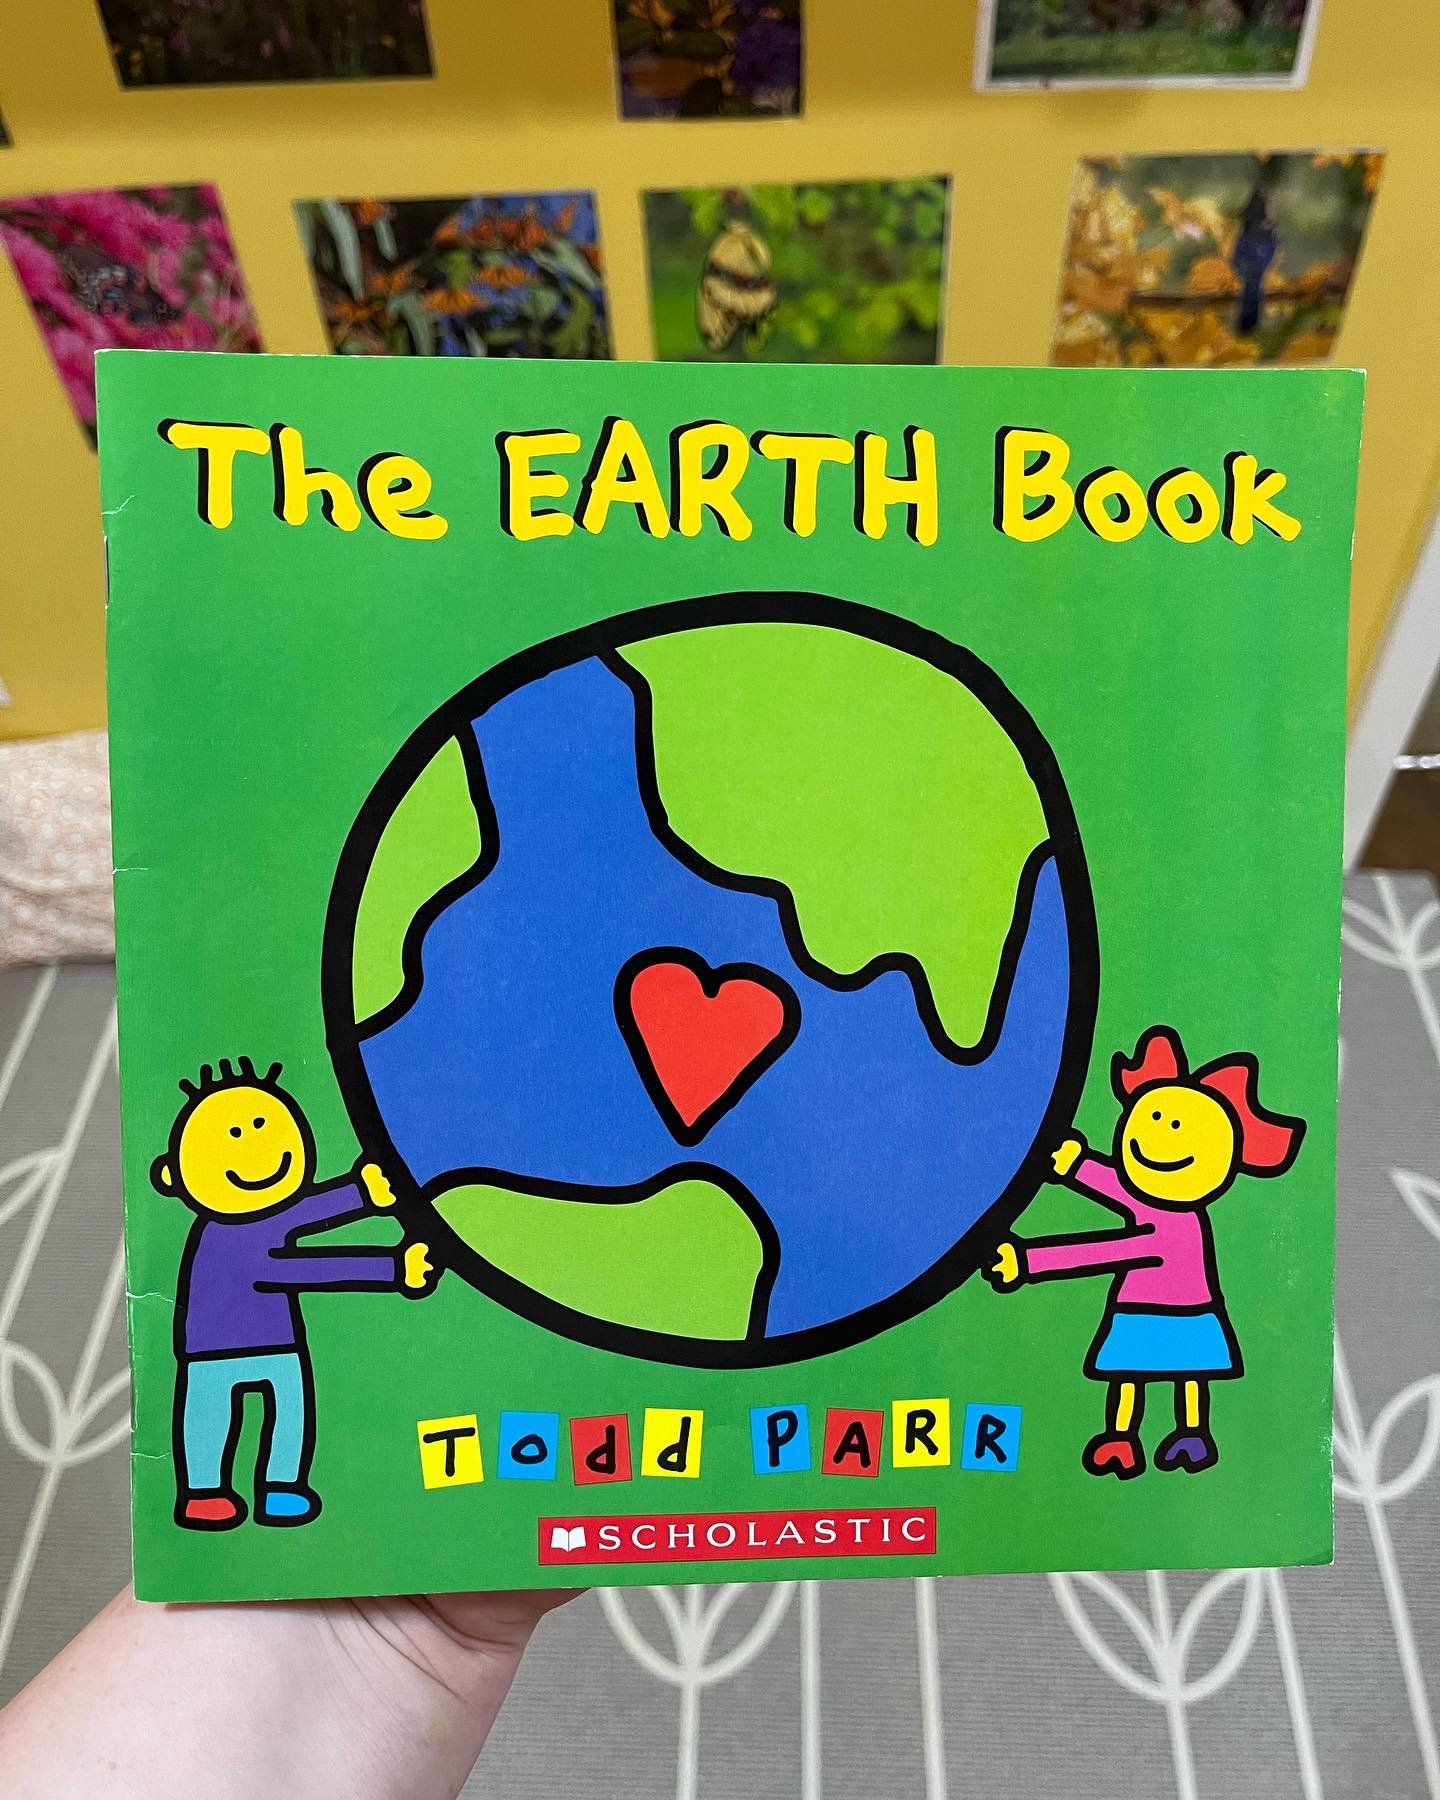 Earth Week continues! 🌎 🌍 🌏 Here are a few more books we&rsquo;re reading this week. 

1. &ldquo;The EARTH Book&rdquo; by Todd Part

2. &ldquo;Earth Ninja&rdquo; by Mary a gun

#tigerlilypreschool #earthweek #earthday #preschoolearthday #seattlepr